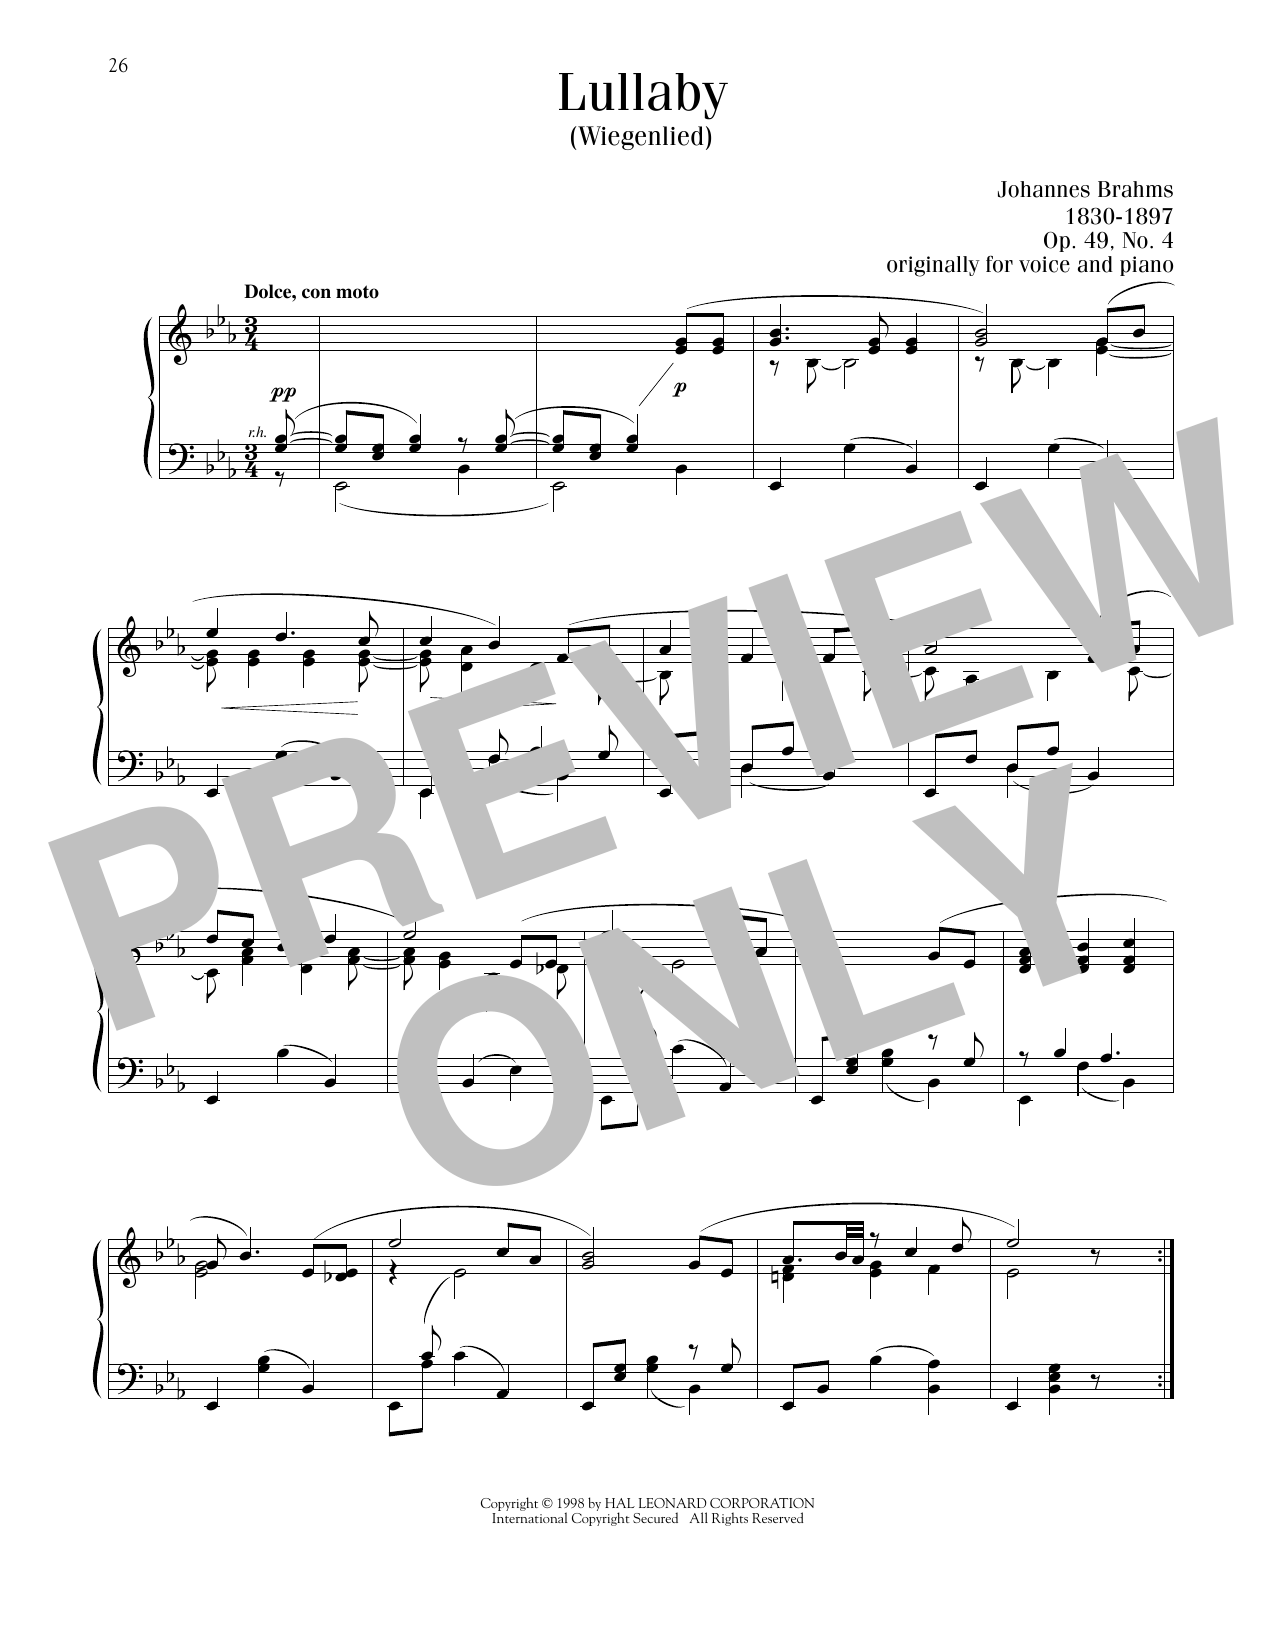 Johannes Brahms Lullaby (Cradle Song) sheet music notes printable PDF score